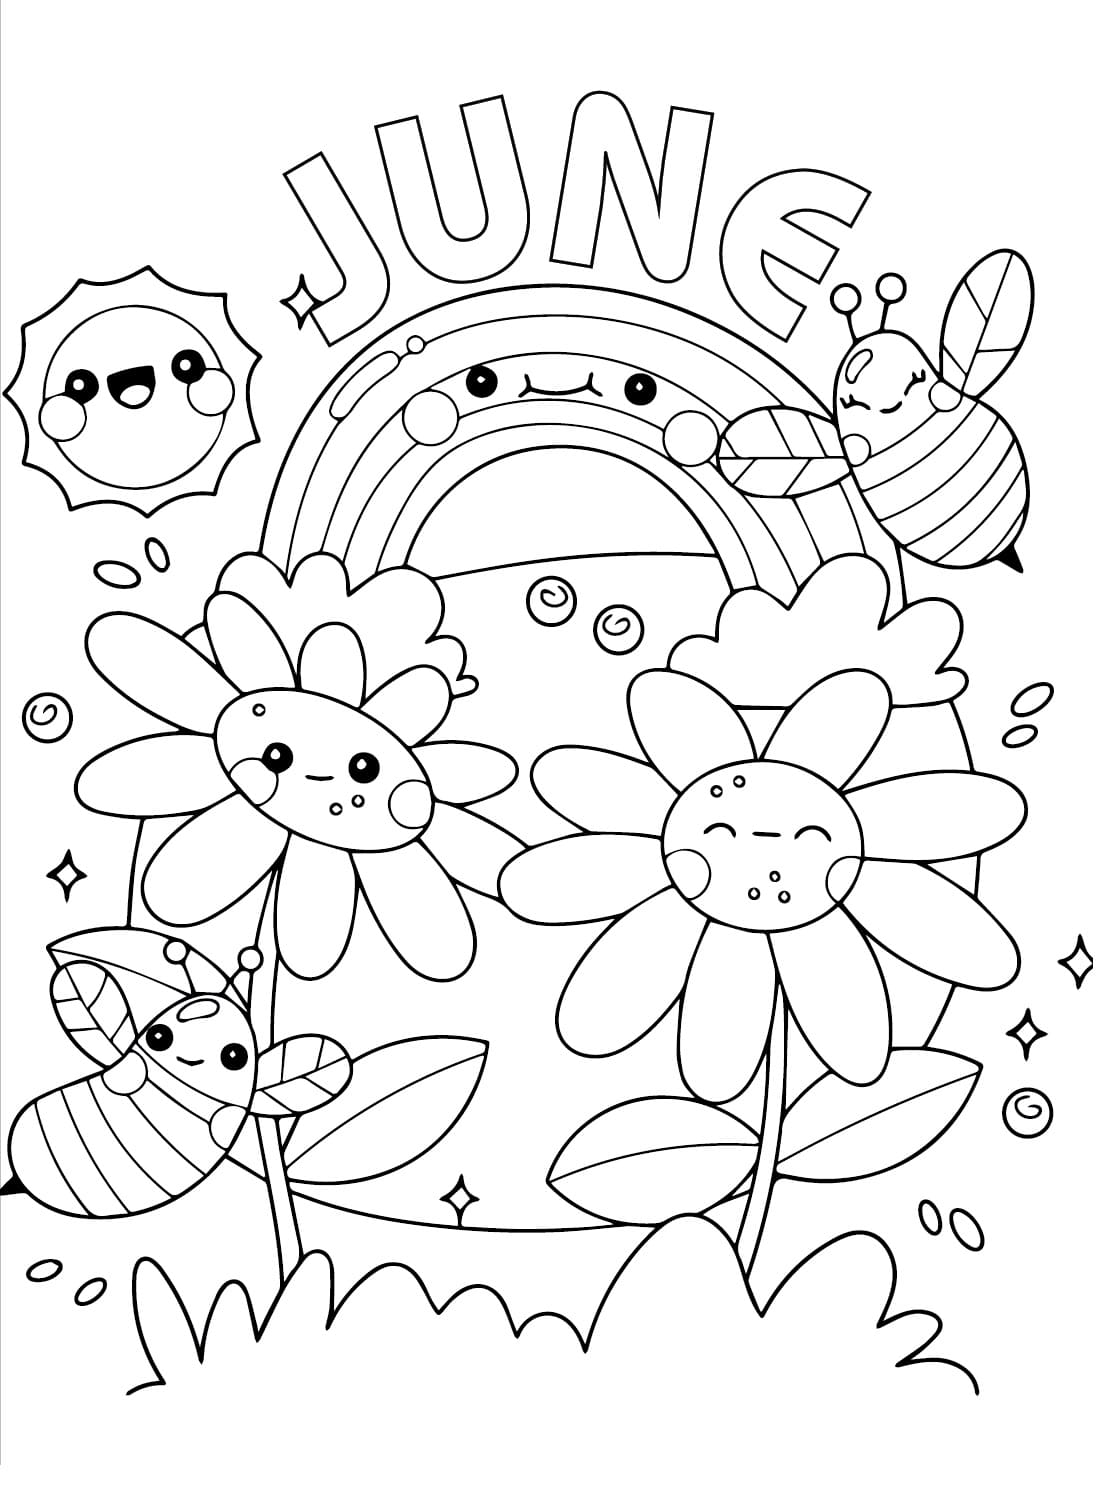 Print June coloring page - Download, Print or Color Online for Free